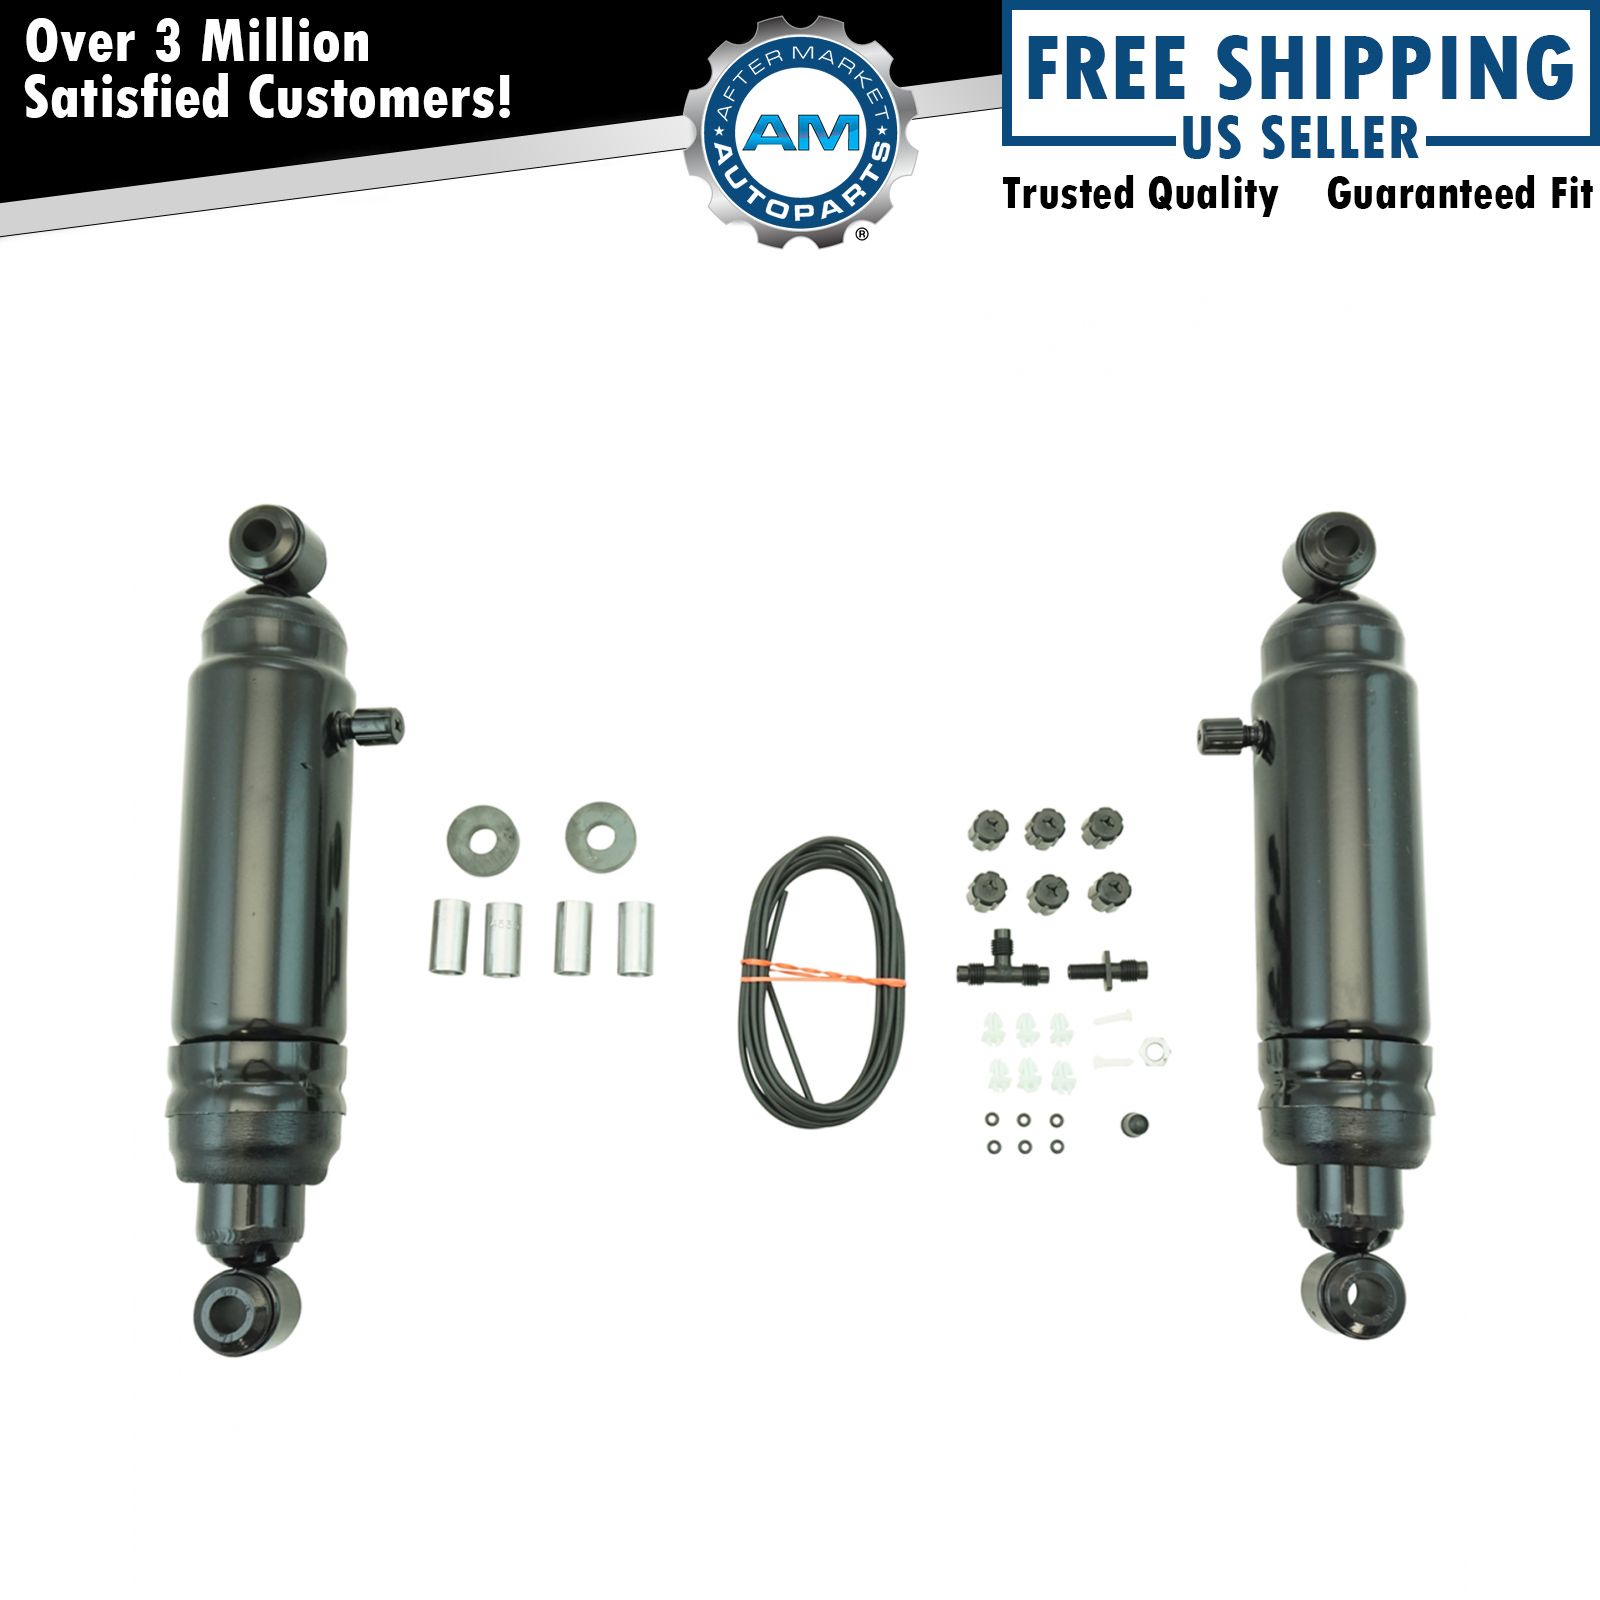 Monroe Max-Air MA727 Rear Shock Absorber Pair for Buick Chevy Chrysler Toyota